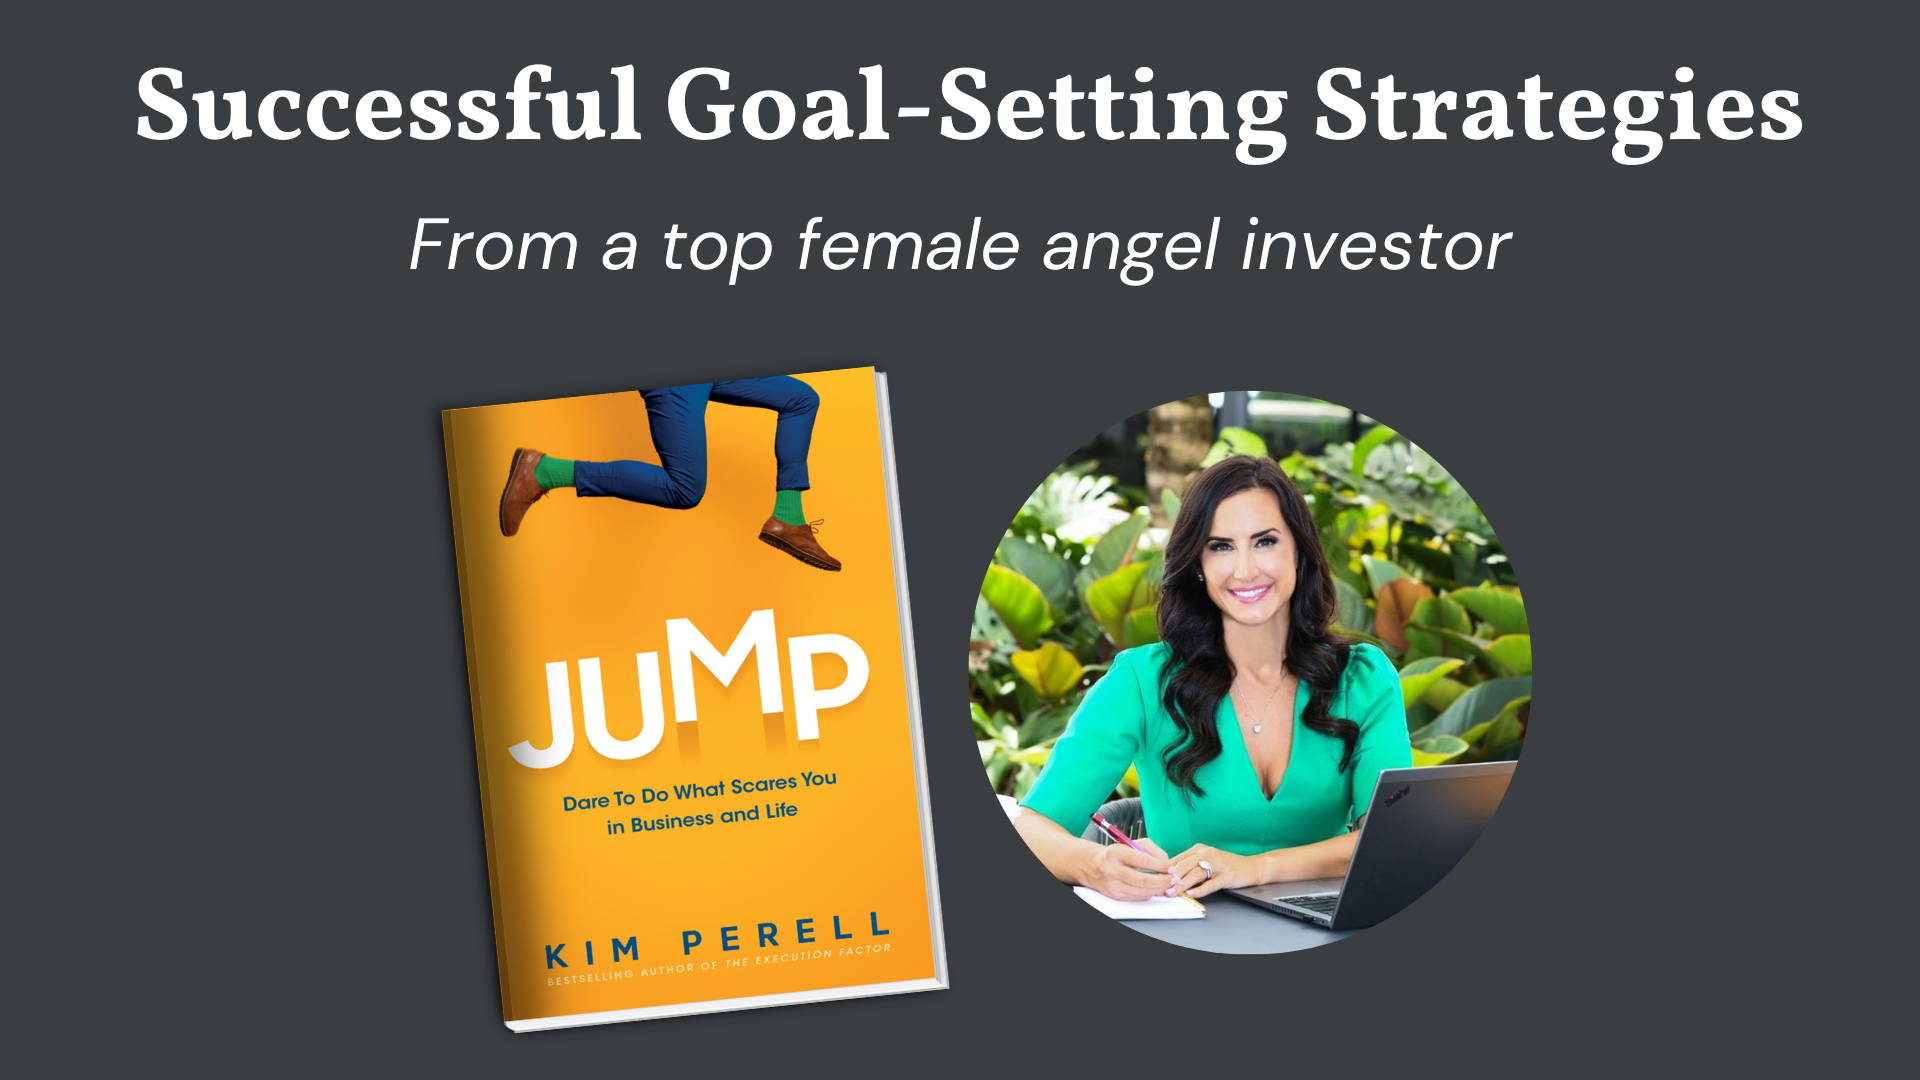 JUMP book with goal-setting strategies